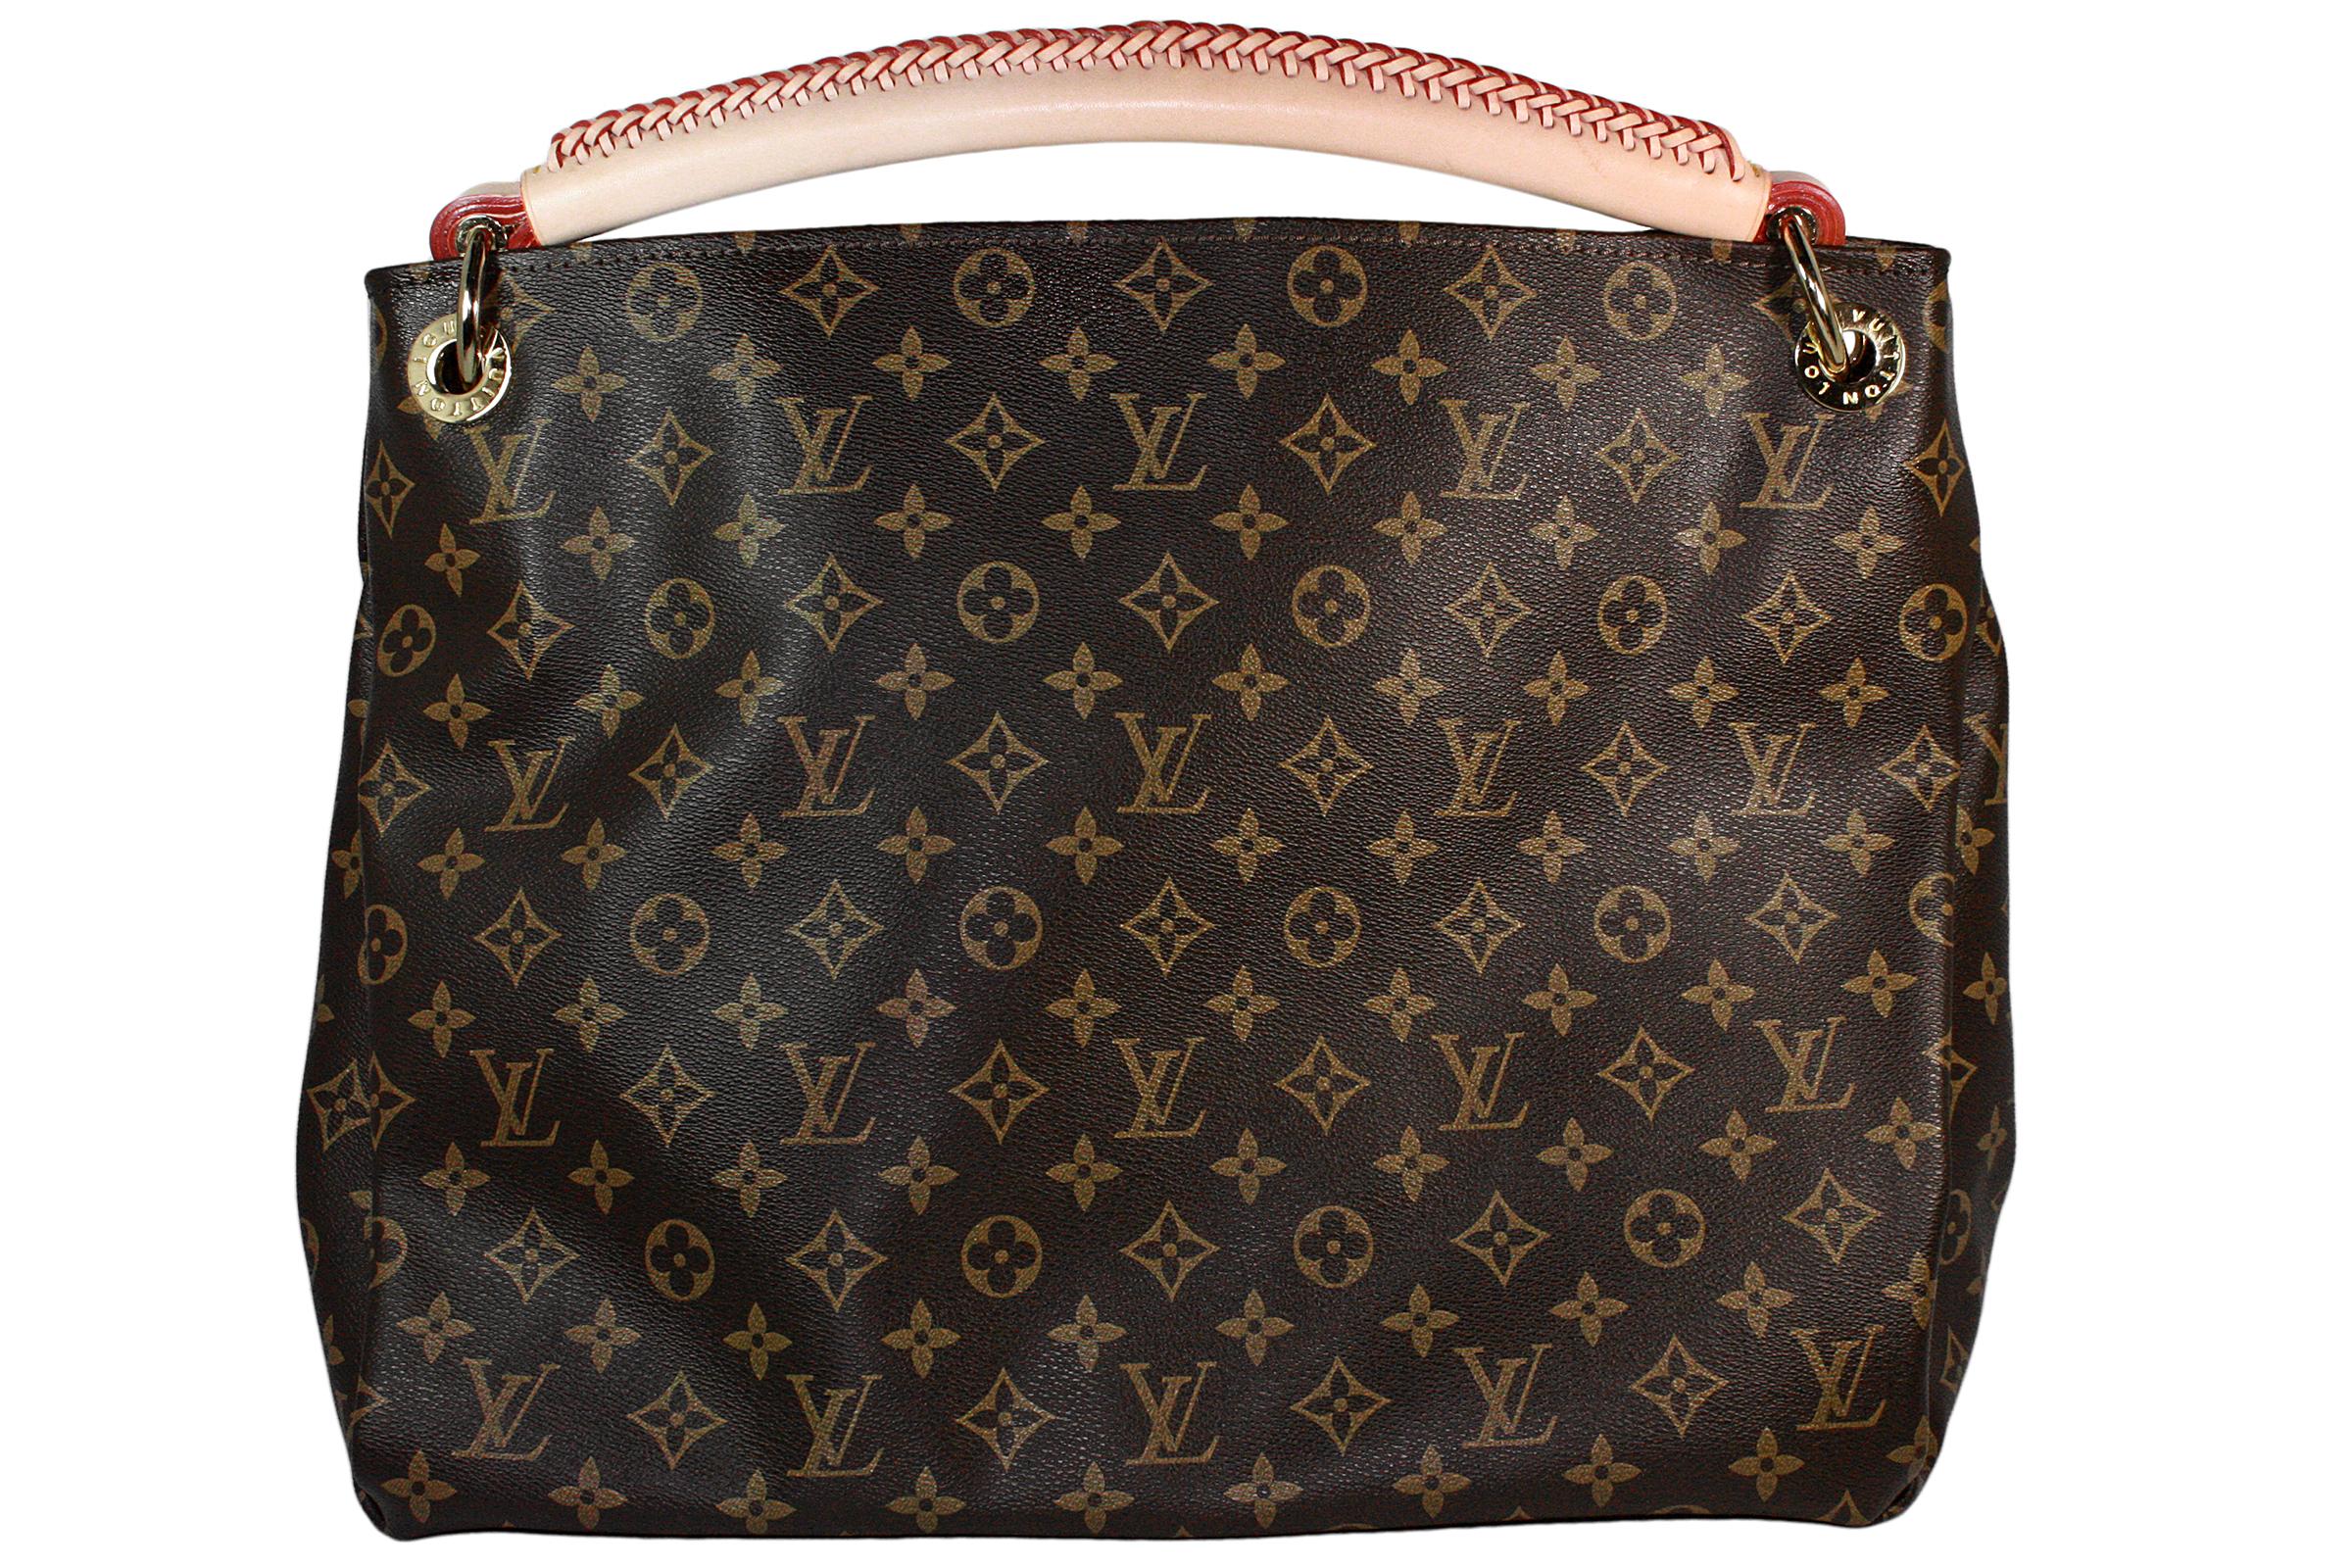 Louis Vuitton shoulder bag
Made in France 
Classic monogram pattern 
Gold hardware
Braided leather handle 
Soft beige suede lining 
Zippered interior pocket and card slots 
Comes with yellow dustbag 